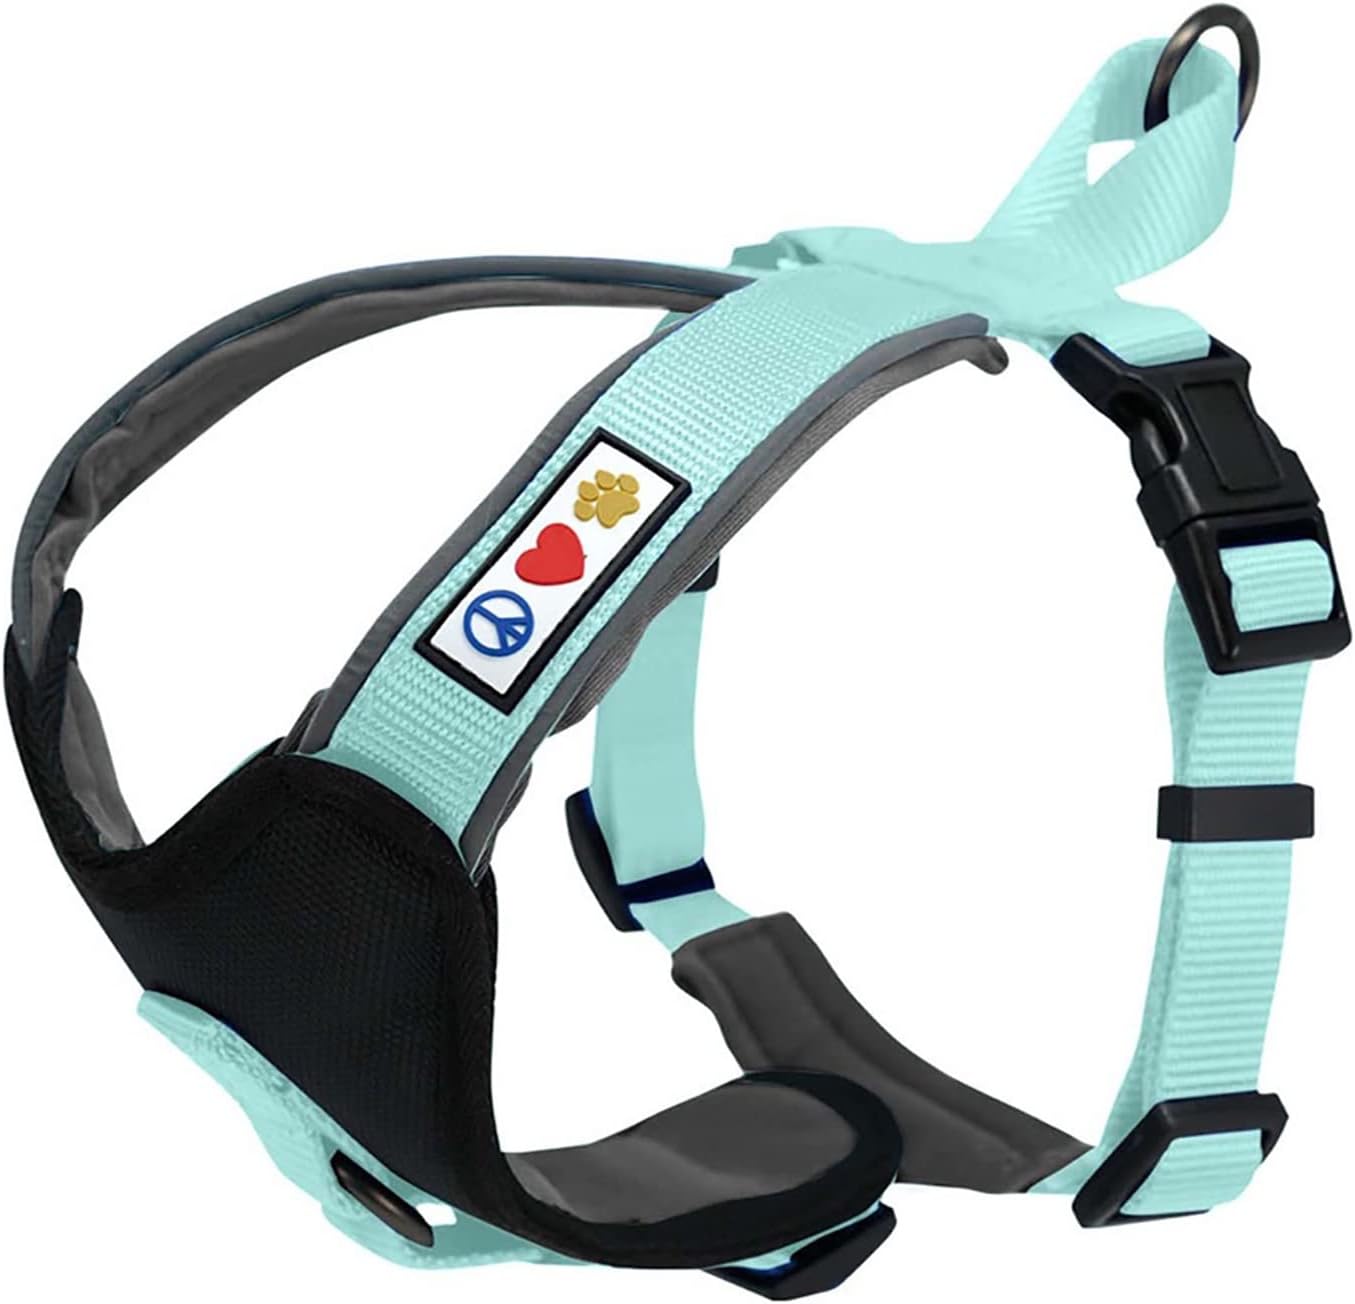 Pawtitas Pet Accessories Adjustable Padded Reflective Dog Harness, Step In Or Vest Harness, Comfort Control Walk, Puppy Trainer, Reduces Pull Tugging, Choking XS Extra Small Teal